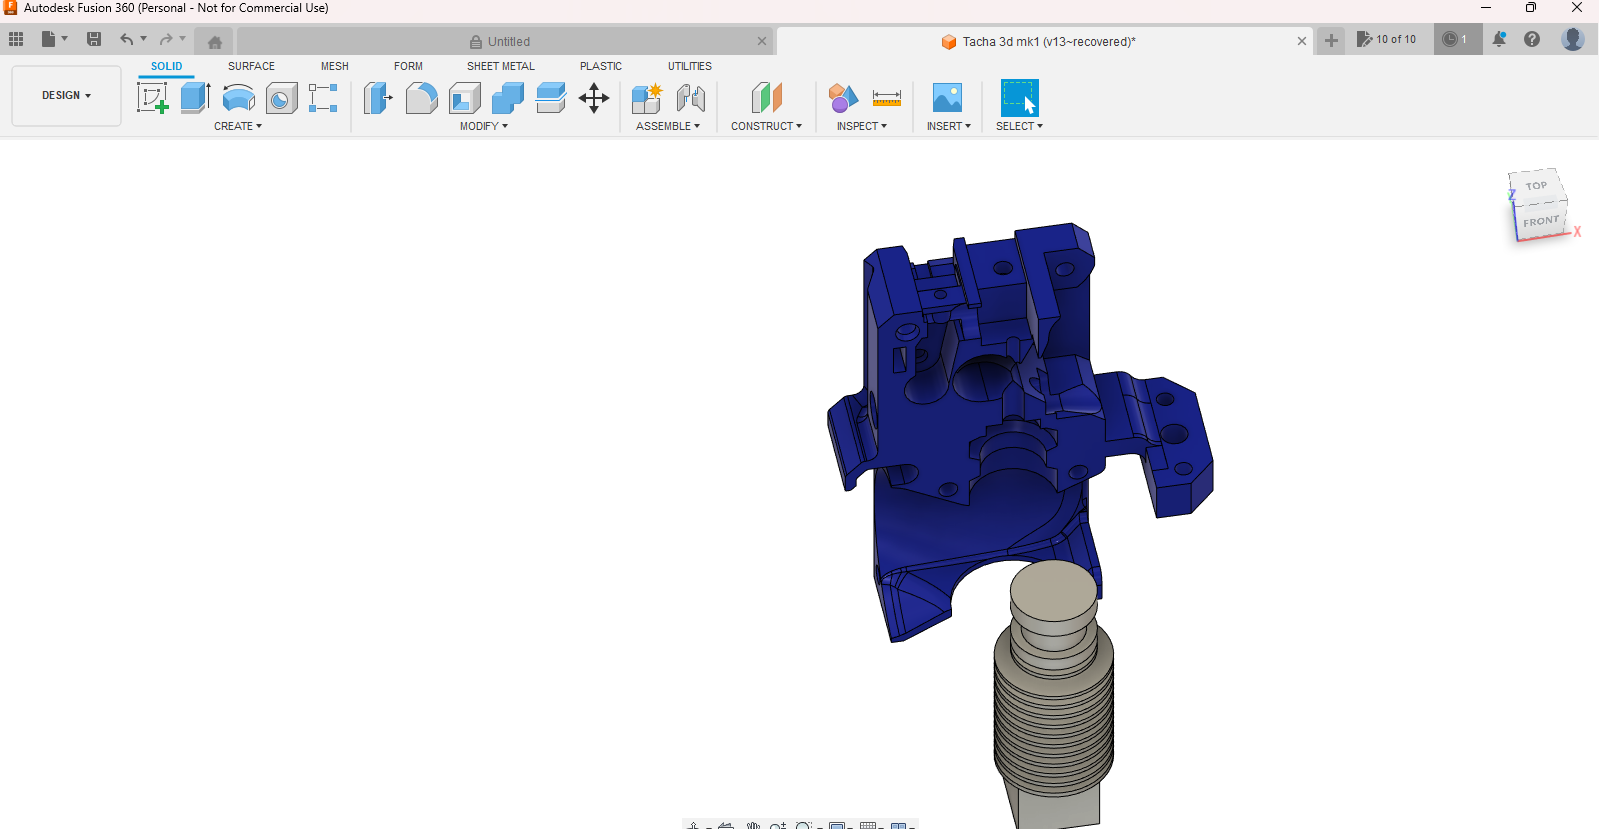 Autodesk Fusion 360 (Personal - Not for Commercial Use) 6_29_2023 10_02_46 PM.png